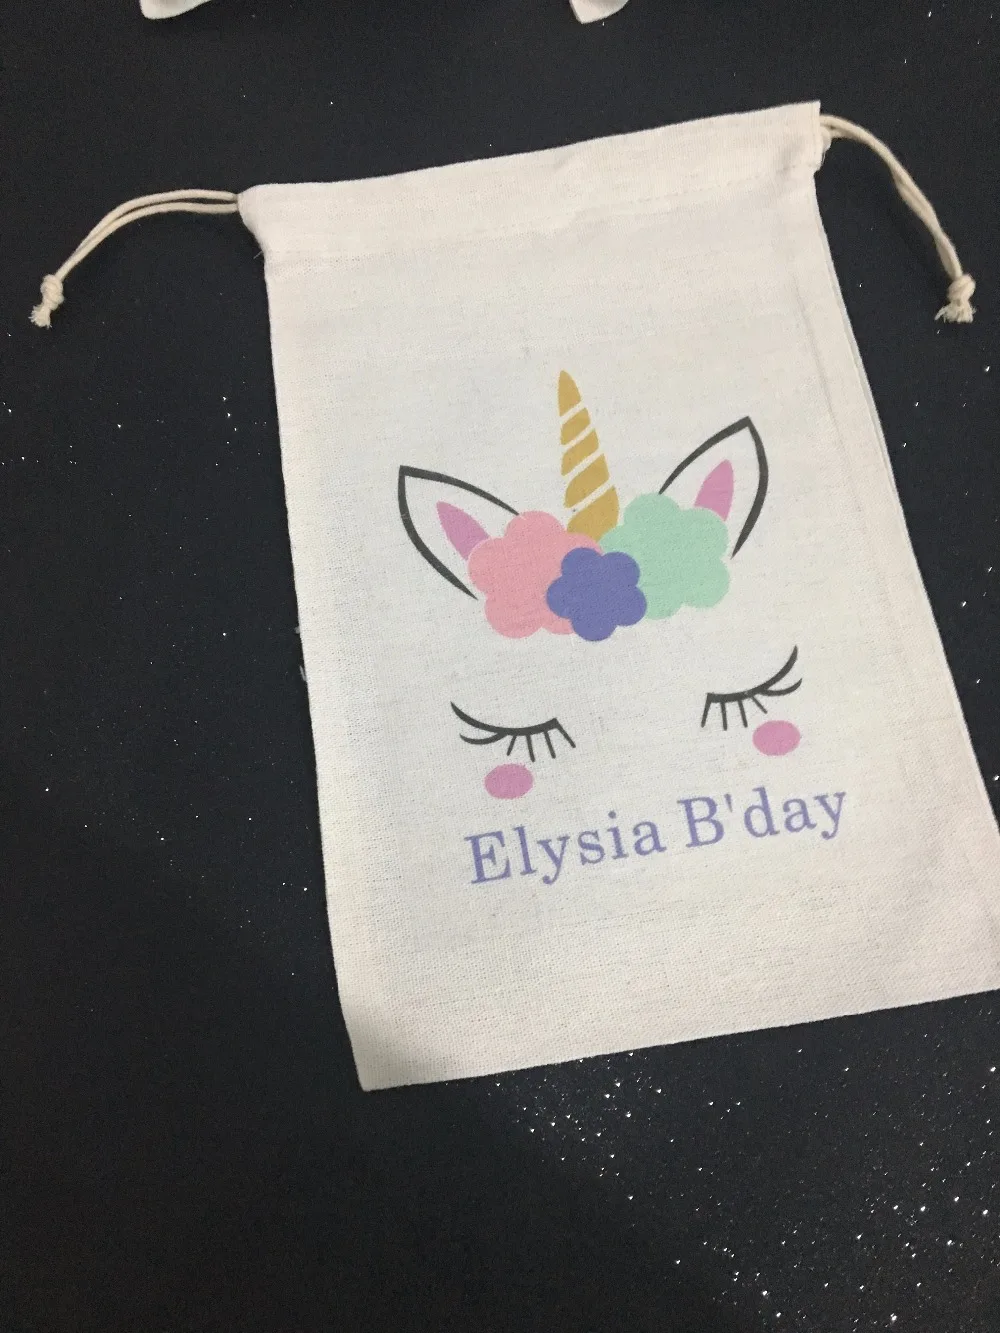 Details about   Personalised Purse or Pencil Case Unicorn Choice of Fabric & Name Party Bag Gift 